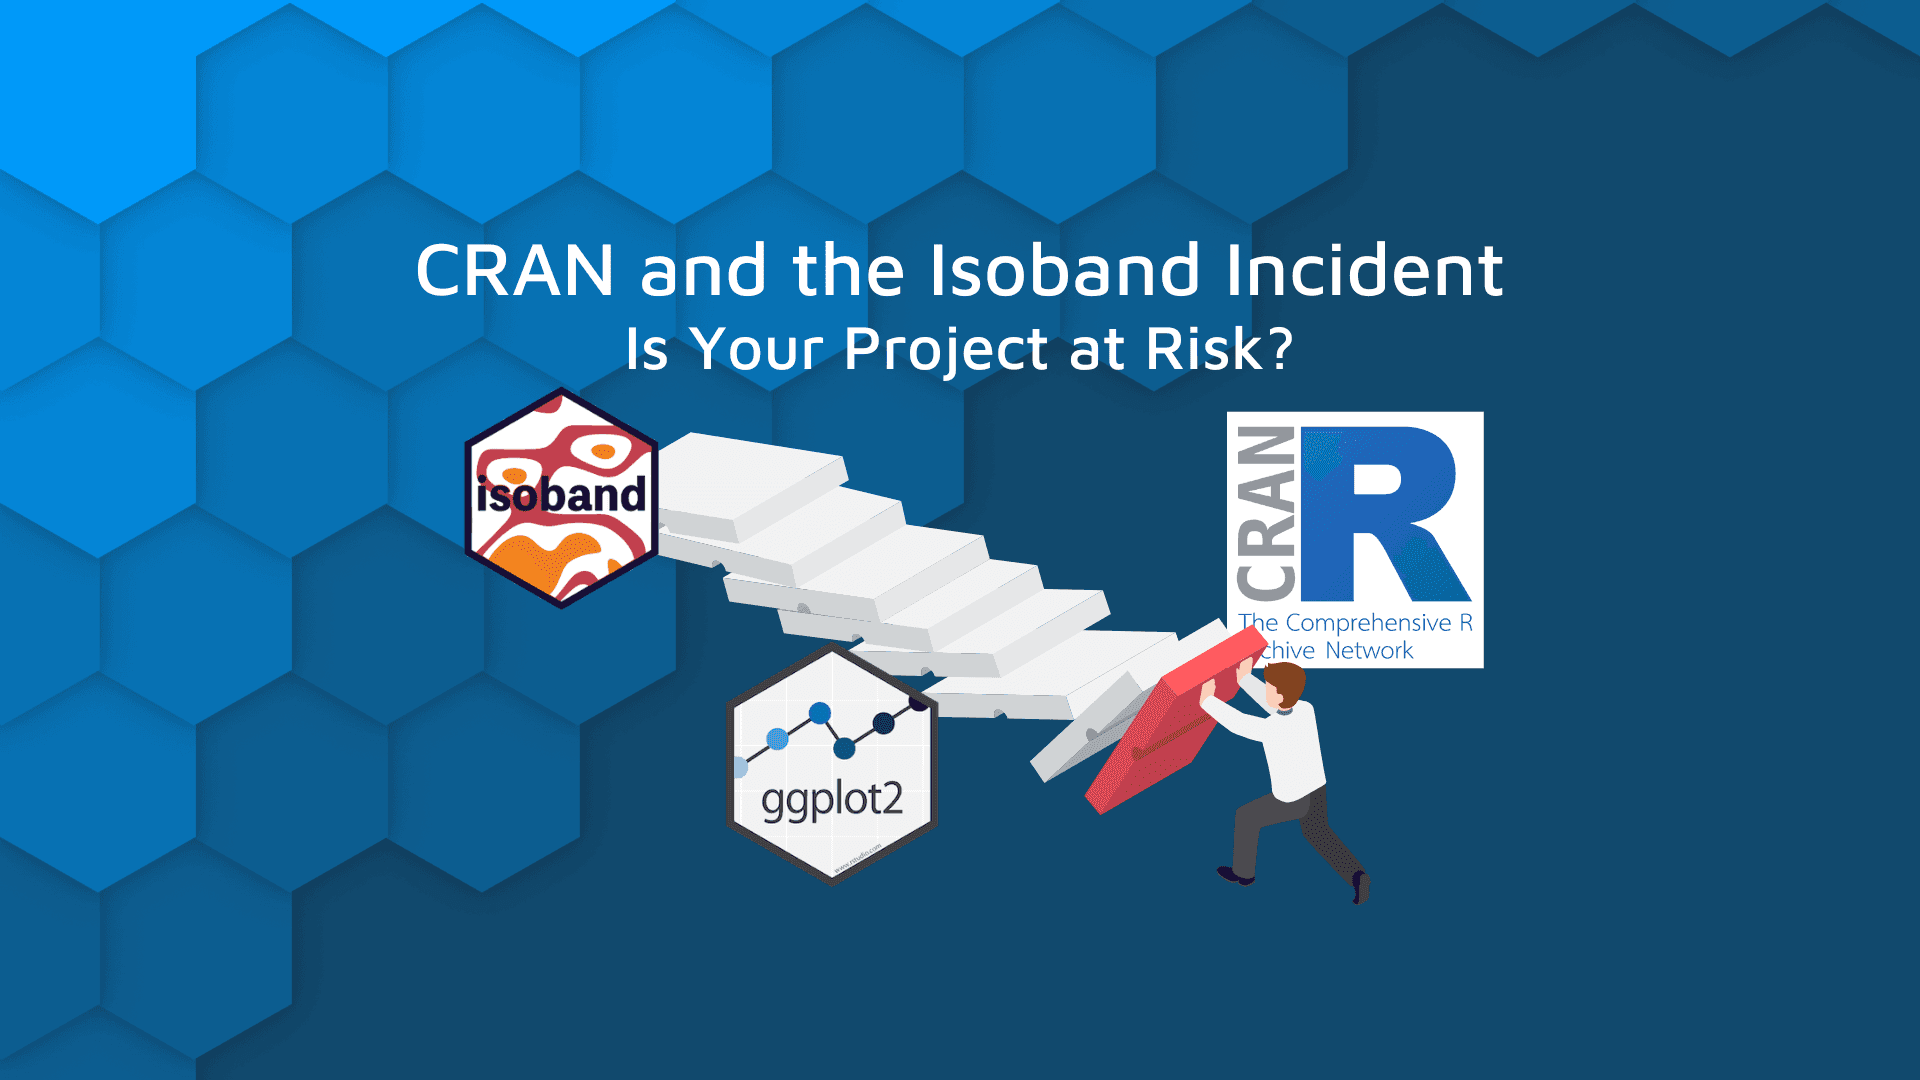 CRAN and the Isoband Incident - is your project at risk of CRAN archiving ggplot2 and other dependencies?